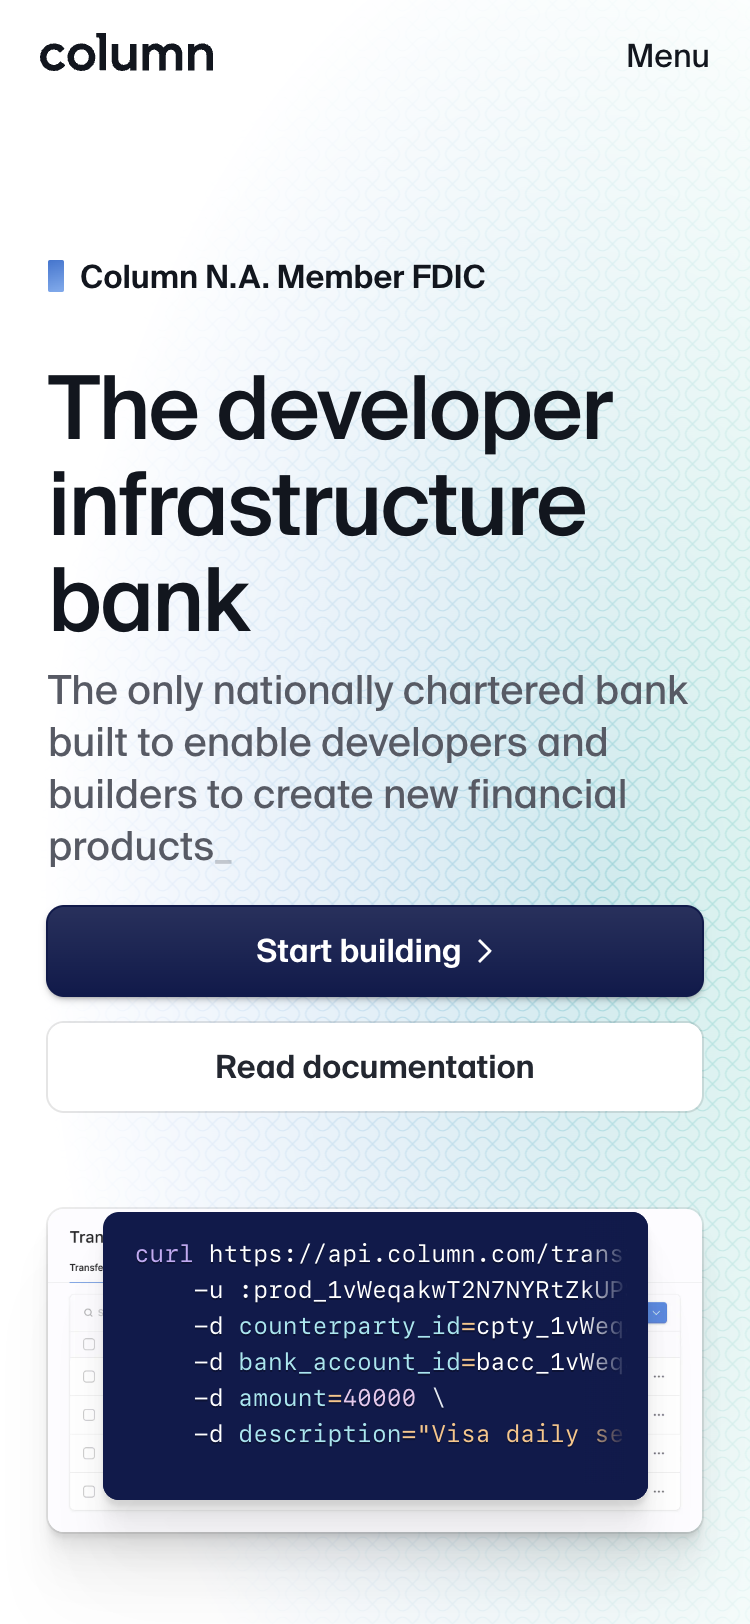 Mobile screenshot of the Column home page. A header contains the Column logo and a 'Menu' button. The hero section contains an example of using 'curl' with the Column API. Call-to-action buttons invite the user to 'Start building' or 'Read documentation'.